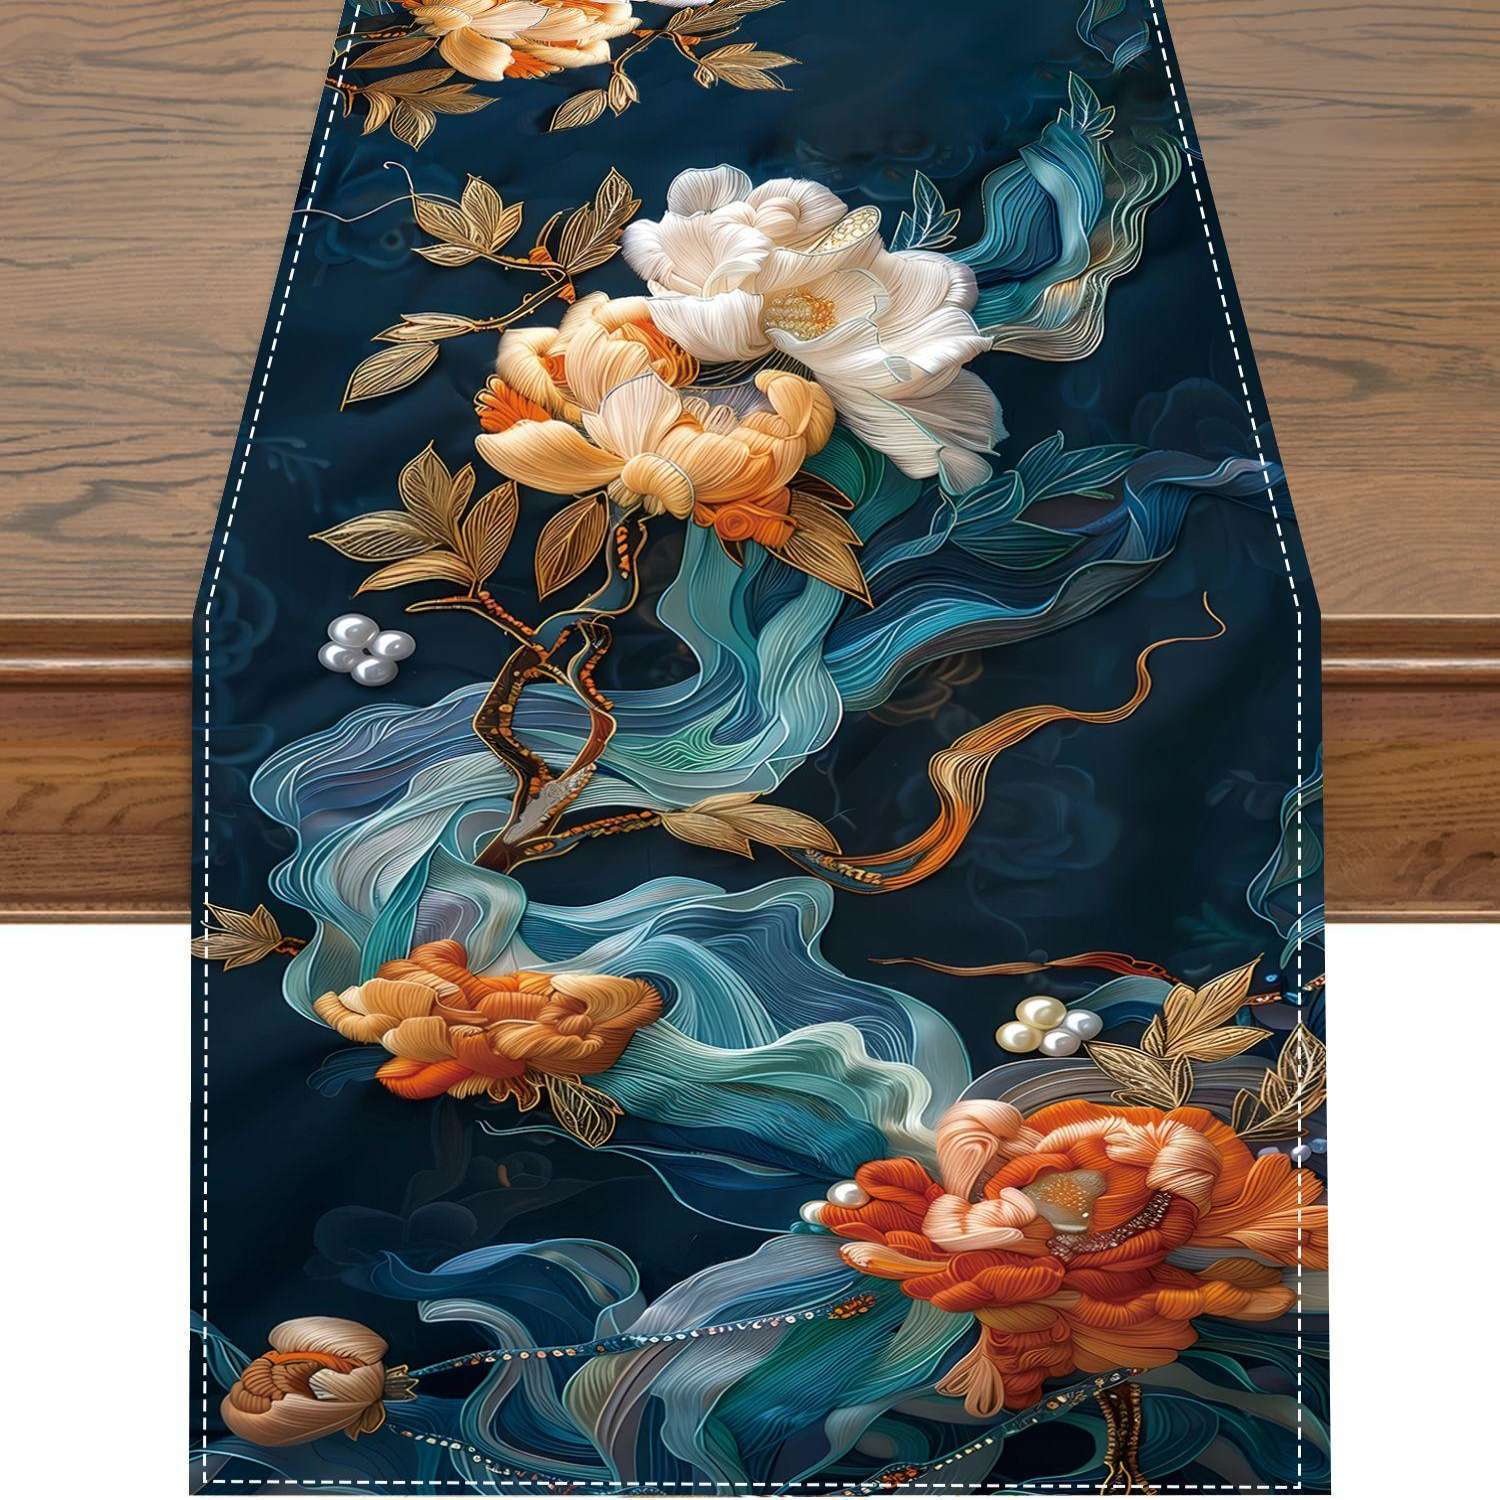 

Embroidered Floral Table Runner - Rectangle Polyester Linen Tablecloth For Kitchen, Dining Room, Outdoor Patio Party And Holiday Decor - Woven Table Flag With 3d Flower Design